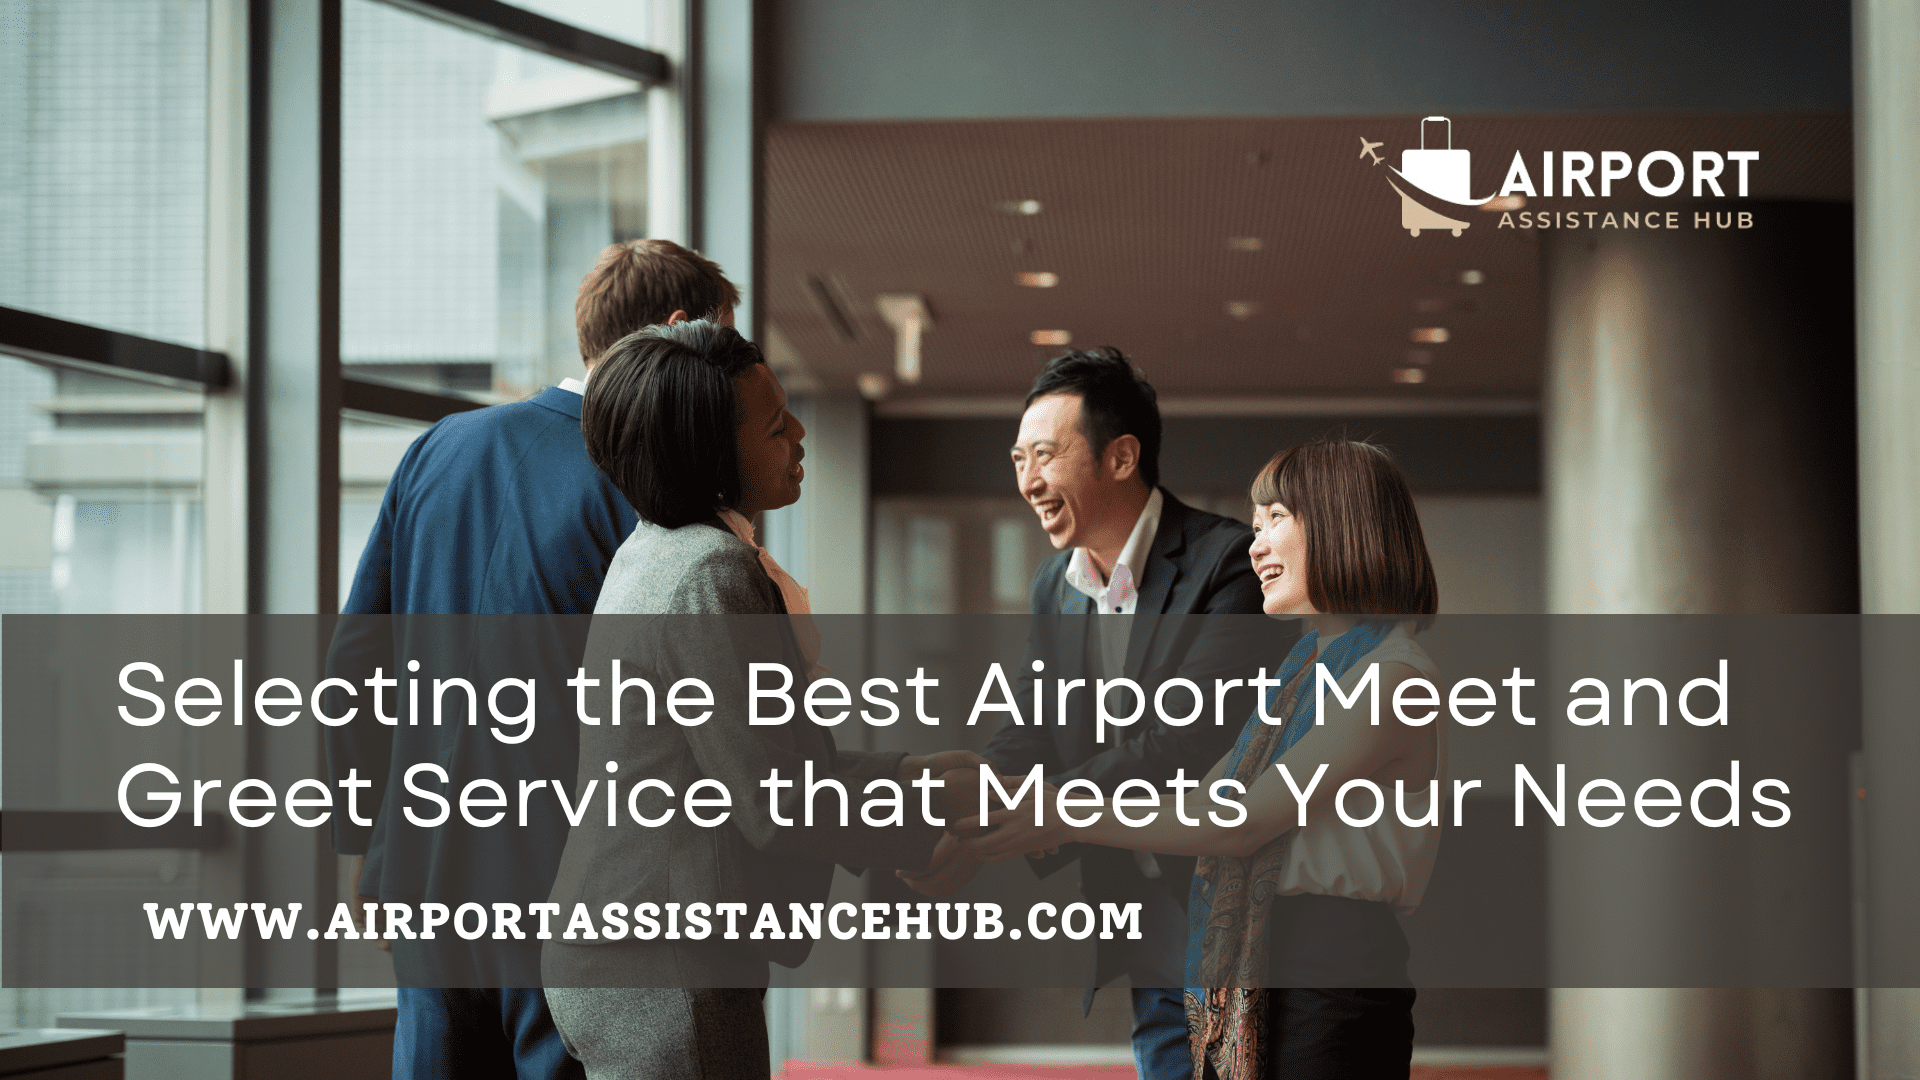 Selecting the Best Airport Meet and Greet Service that Meets Your Needs